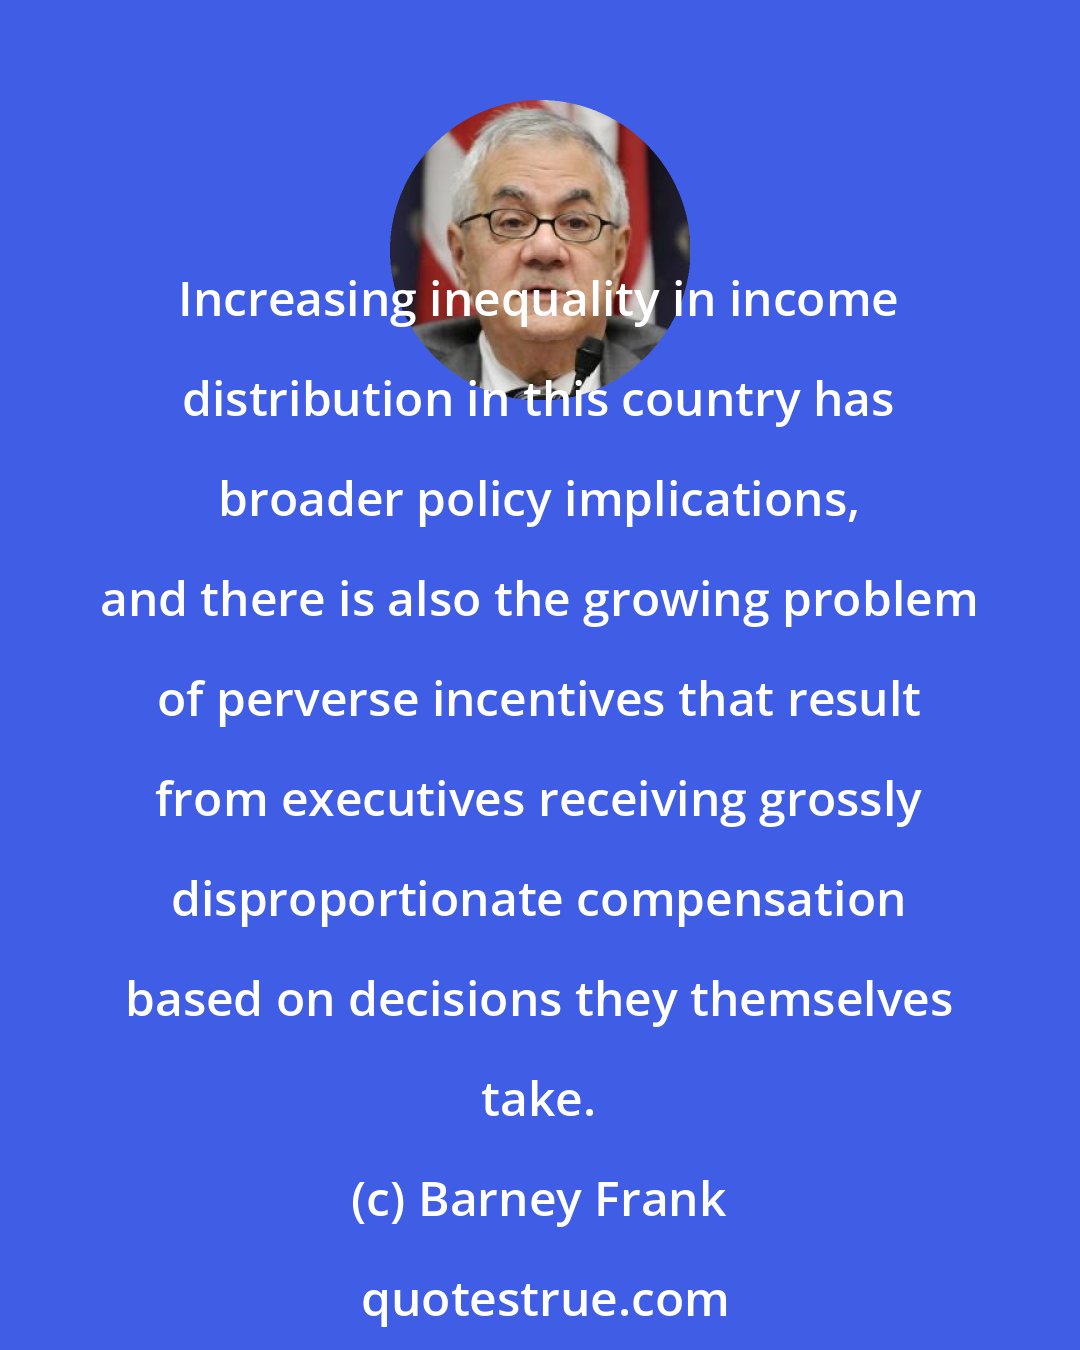 Barney Frank: Increasing inequality in income distribution in this country has broader policy implications, and there is also the growing problem of perverse incentives that result from executives receiving grossly disproportionate compensation based on decisions they themselves take.